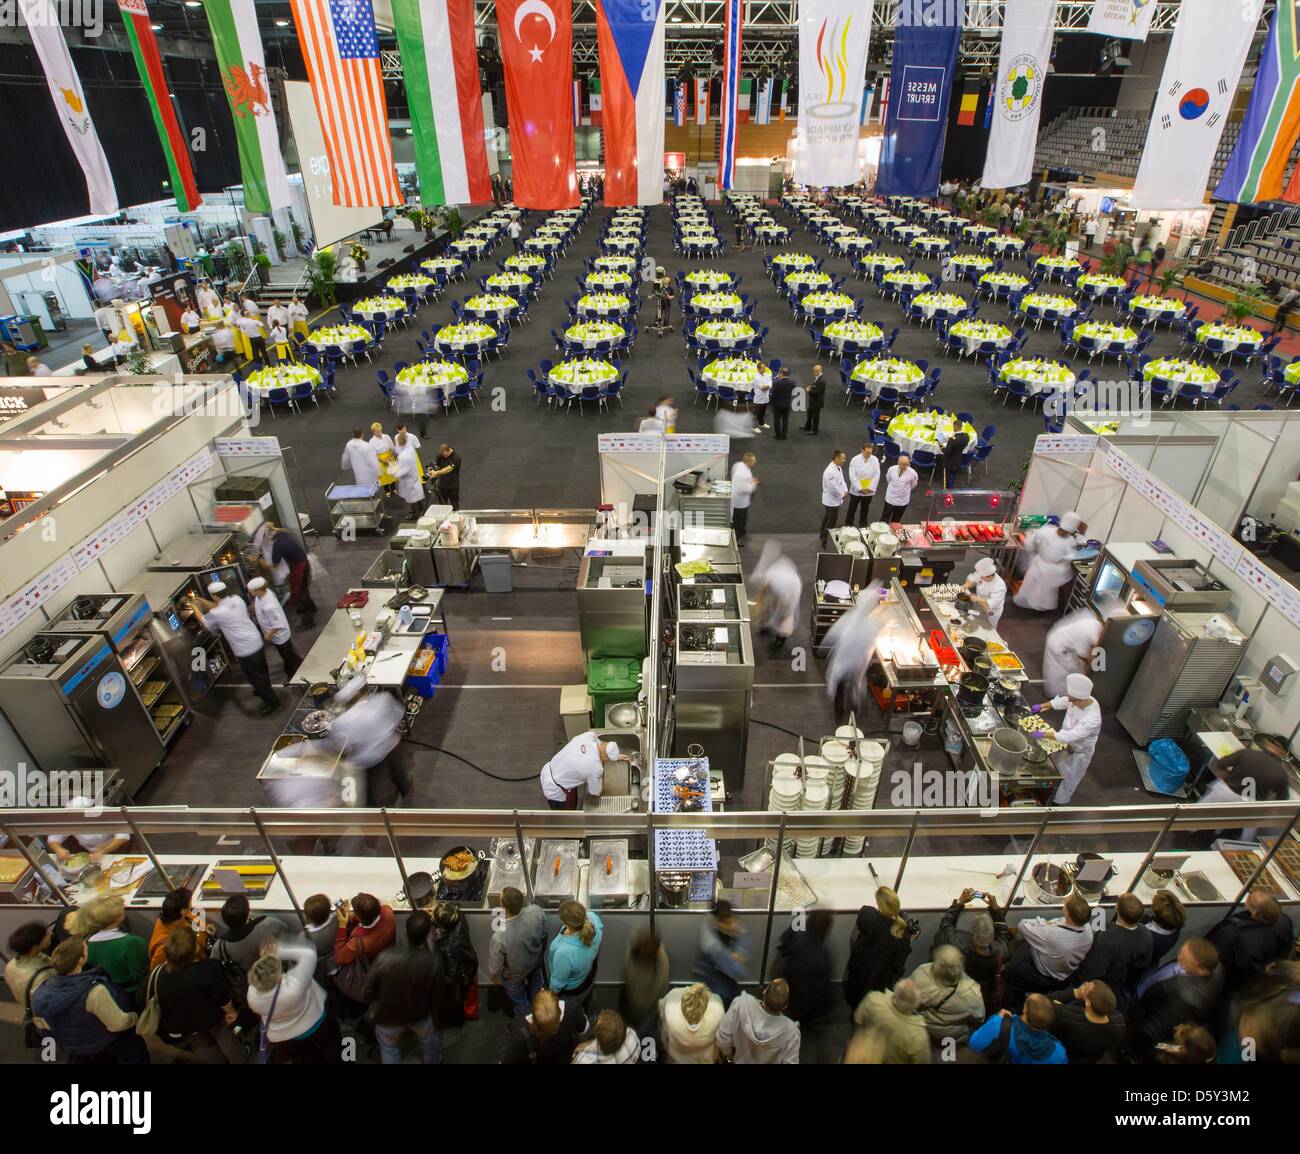 Visitors view chefs at the Culinary Olympics at the fair in Erfurt, Germany, 07 October 2012. The Swedish national chef team won the International Exhibition of Culinary Art in front of Norway and Germany. Photo: MICHAEL REICHEL Stock Photo